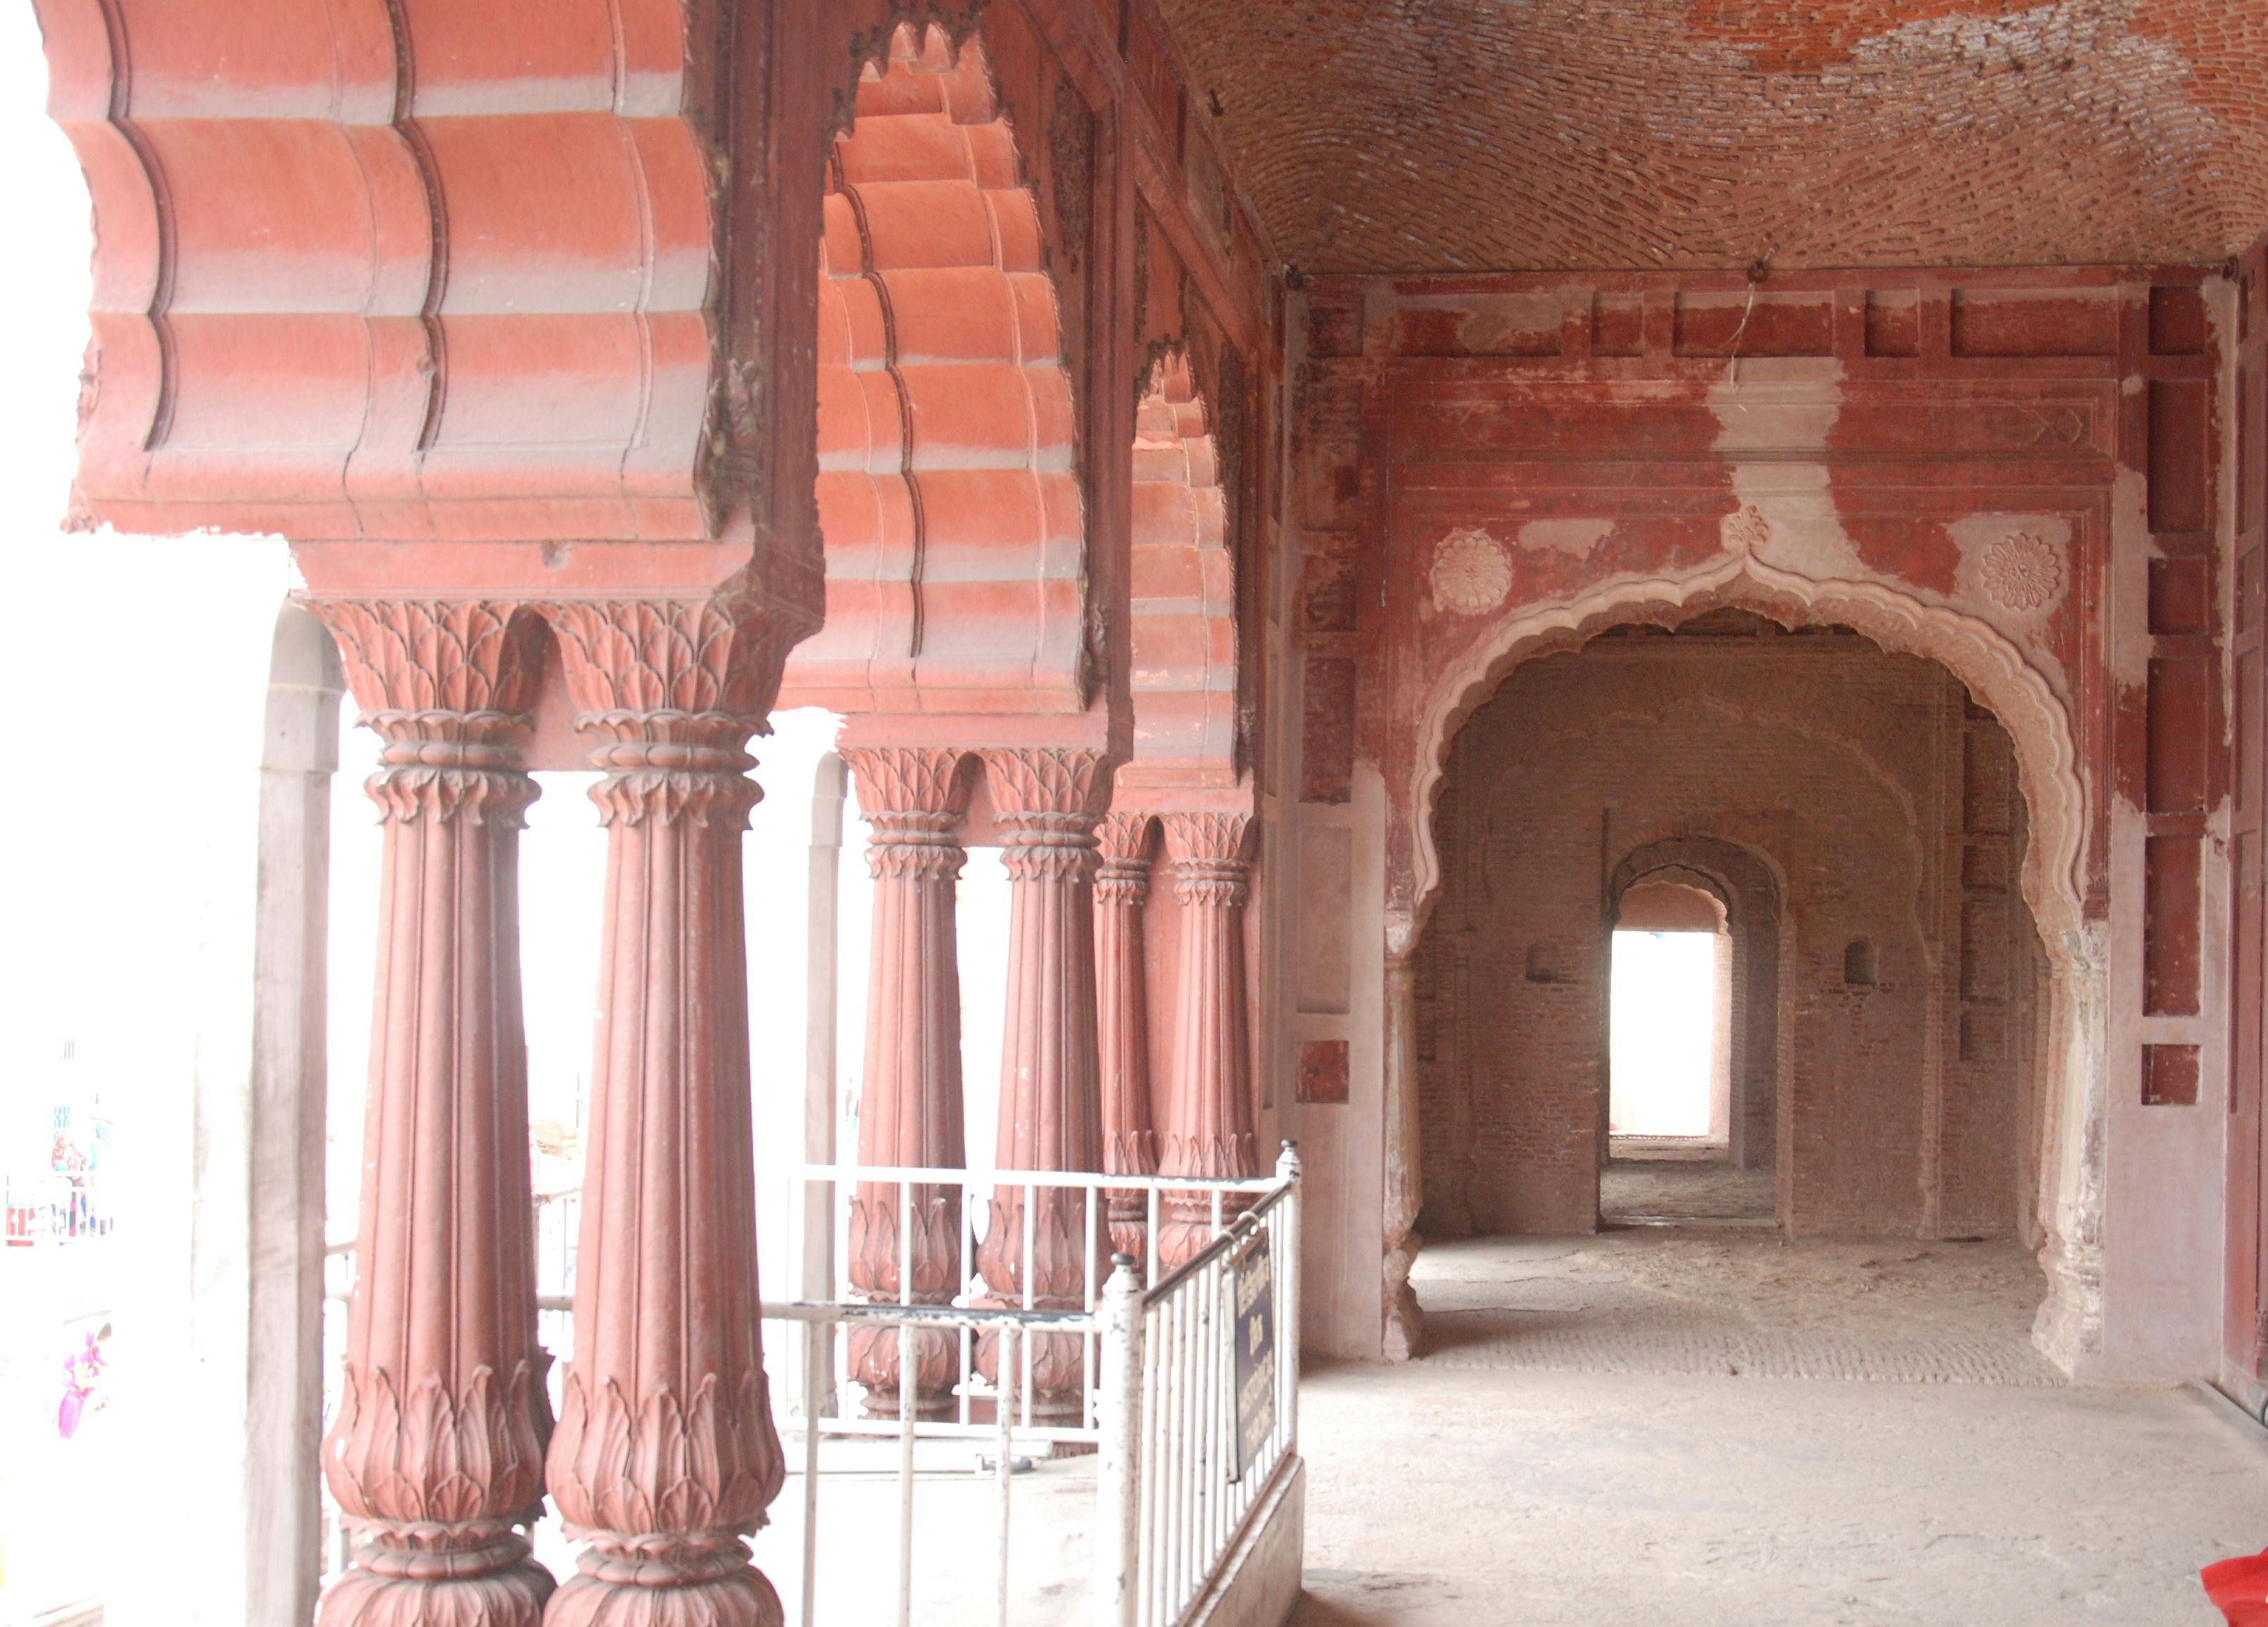 Throne and pillars from the Red Fort